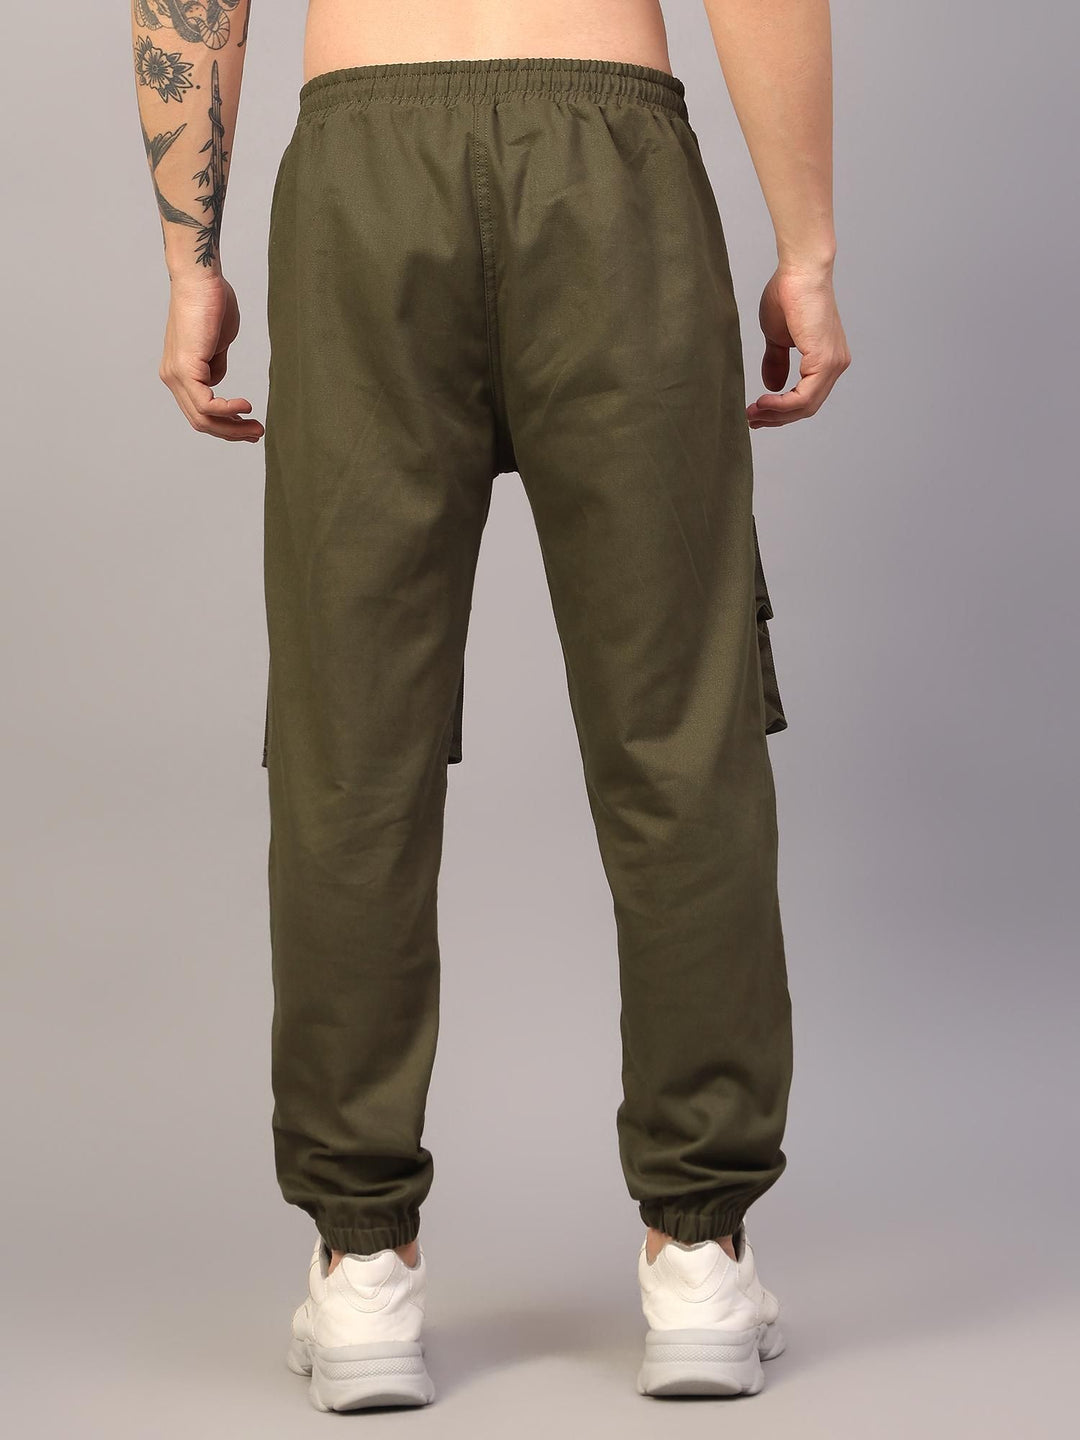 Olive Brand Sprouted Men's Cotton Blend Solid Multipocket Cargo Jogger